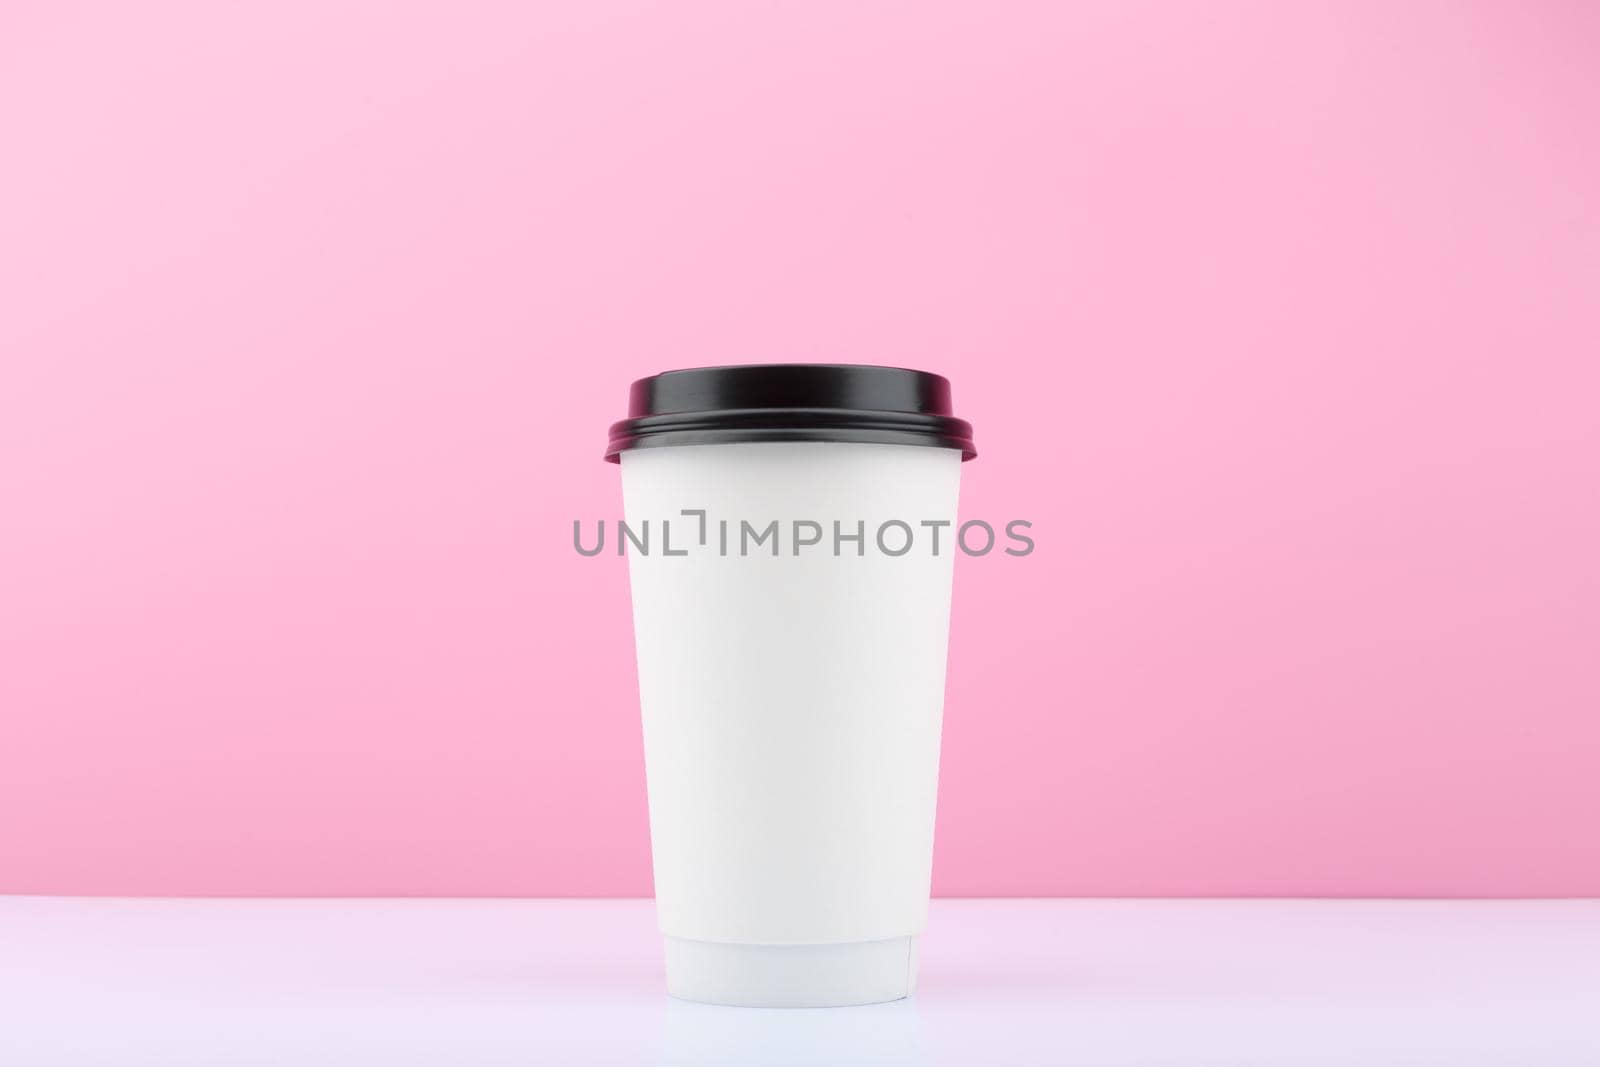 Disposable cup for tea or coffee on white table against bright purple background with copy space.  by Senorina_Irina